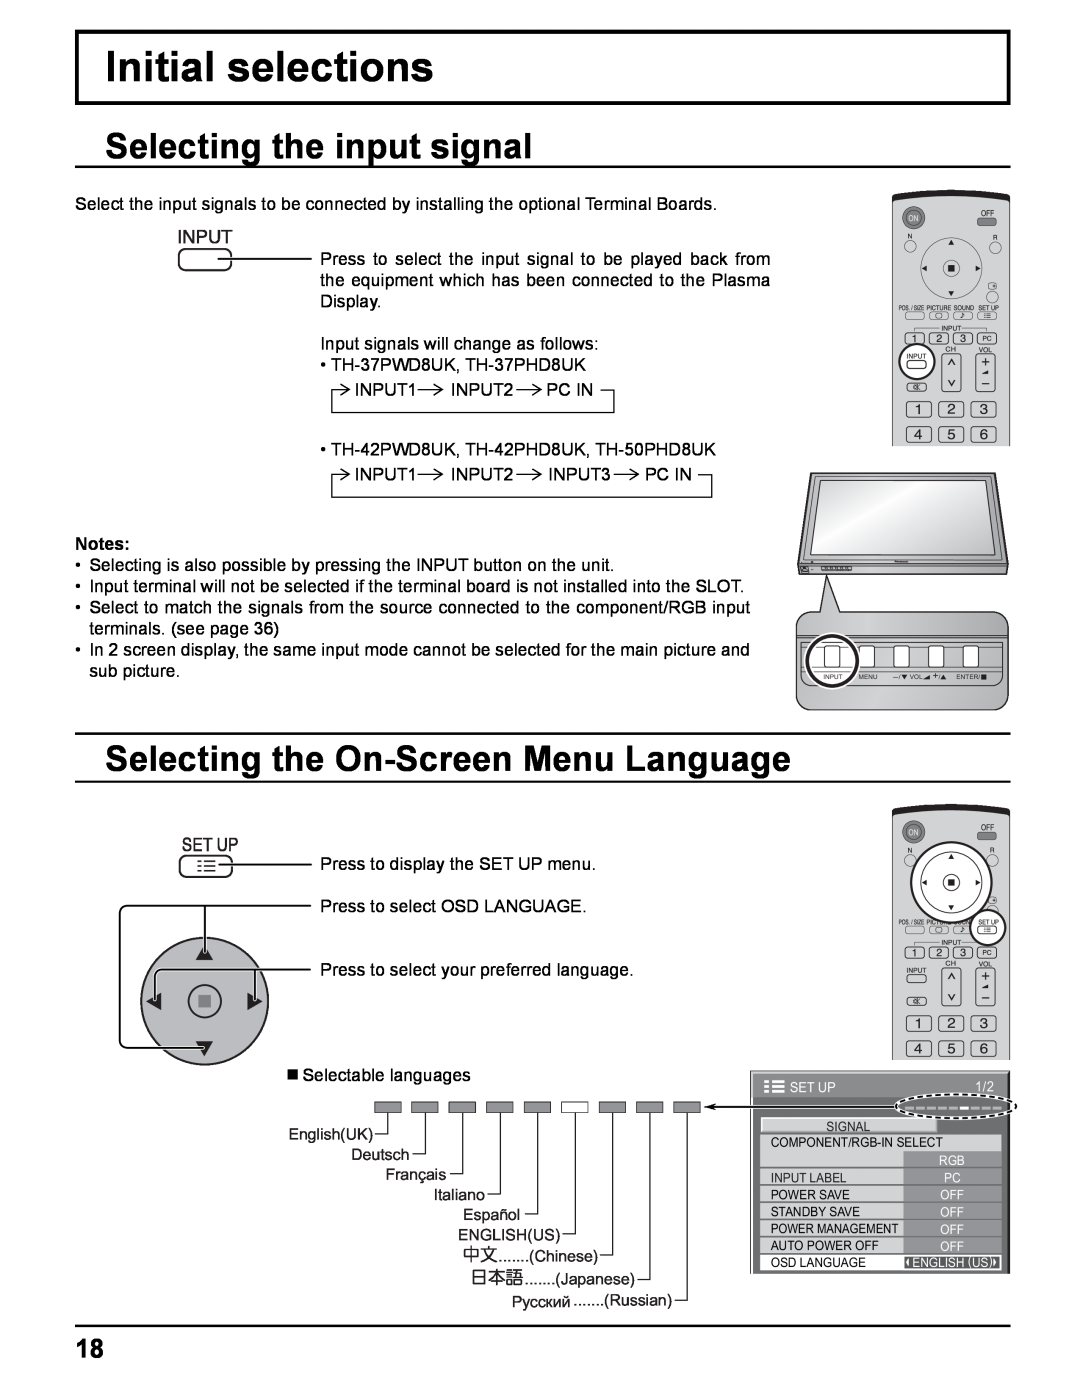 Panasonic TH-42PWD8UK Initial selections, Selecting the input signal, Selecting the On-Screen Menu Language, sub picture 